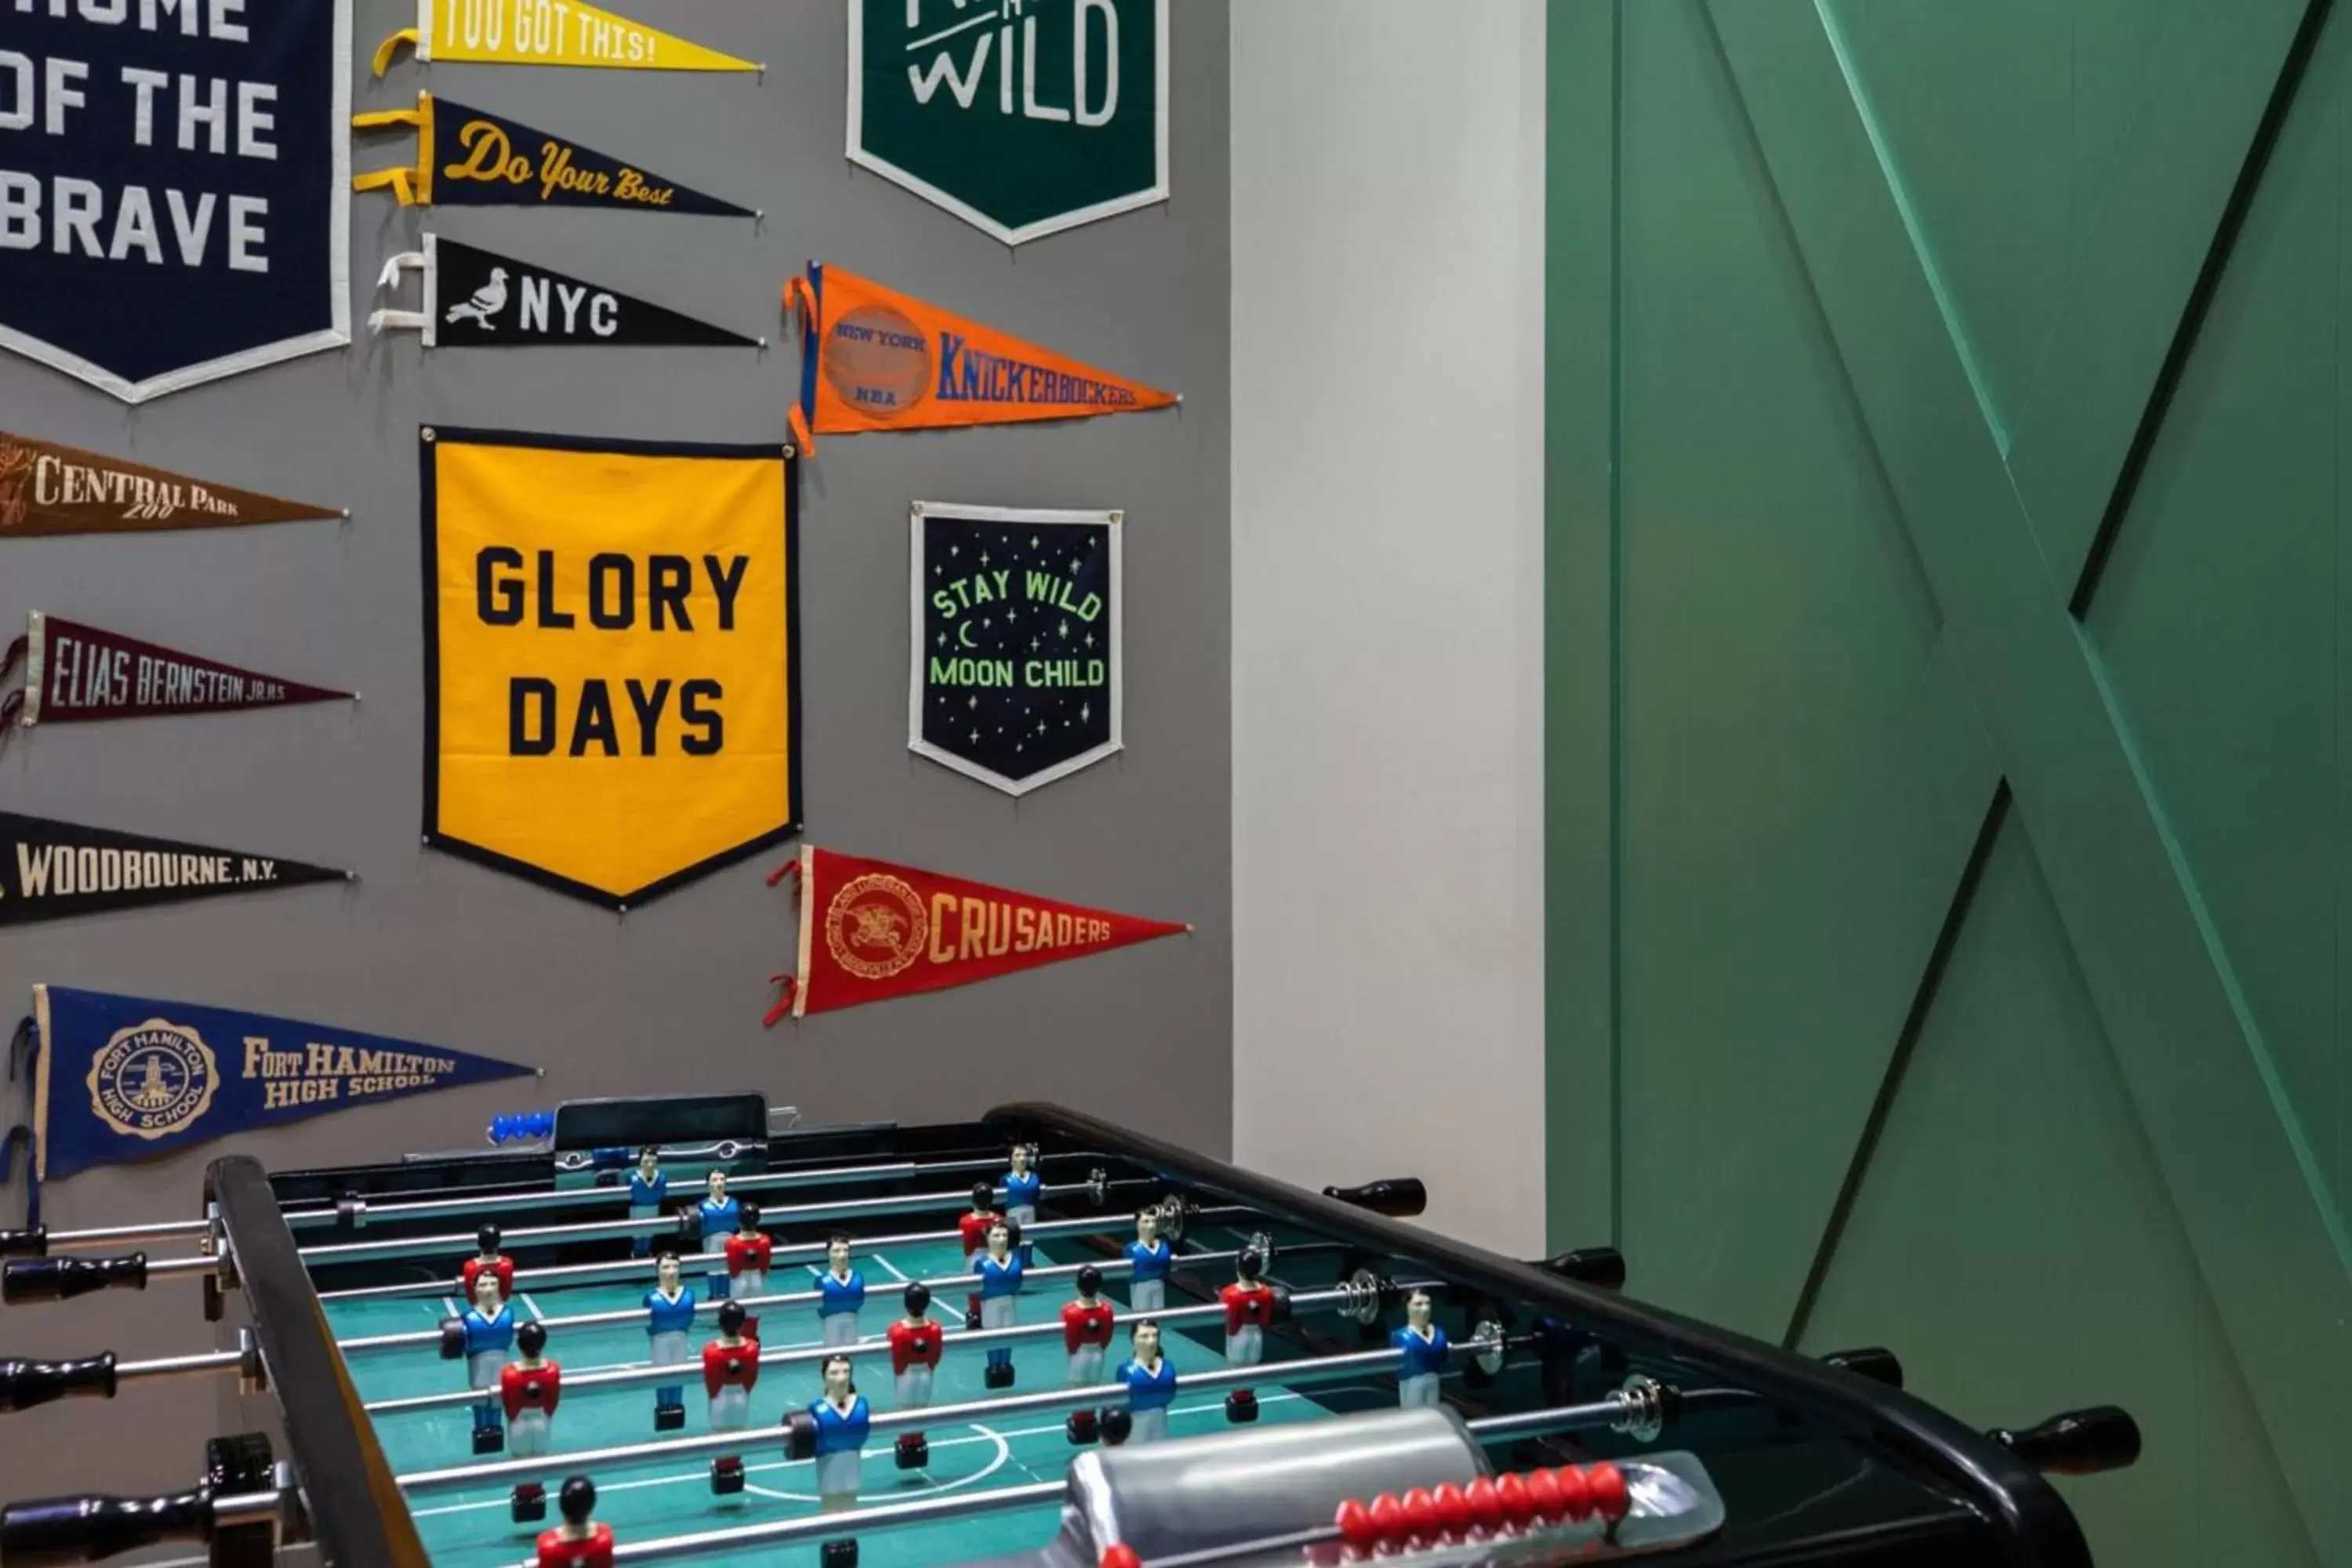 Area and facilities, Billiards in Moxy NYC Downtown